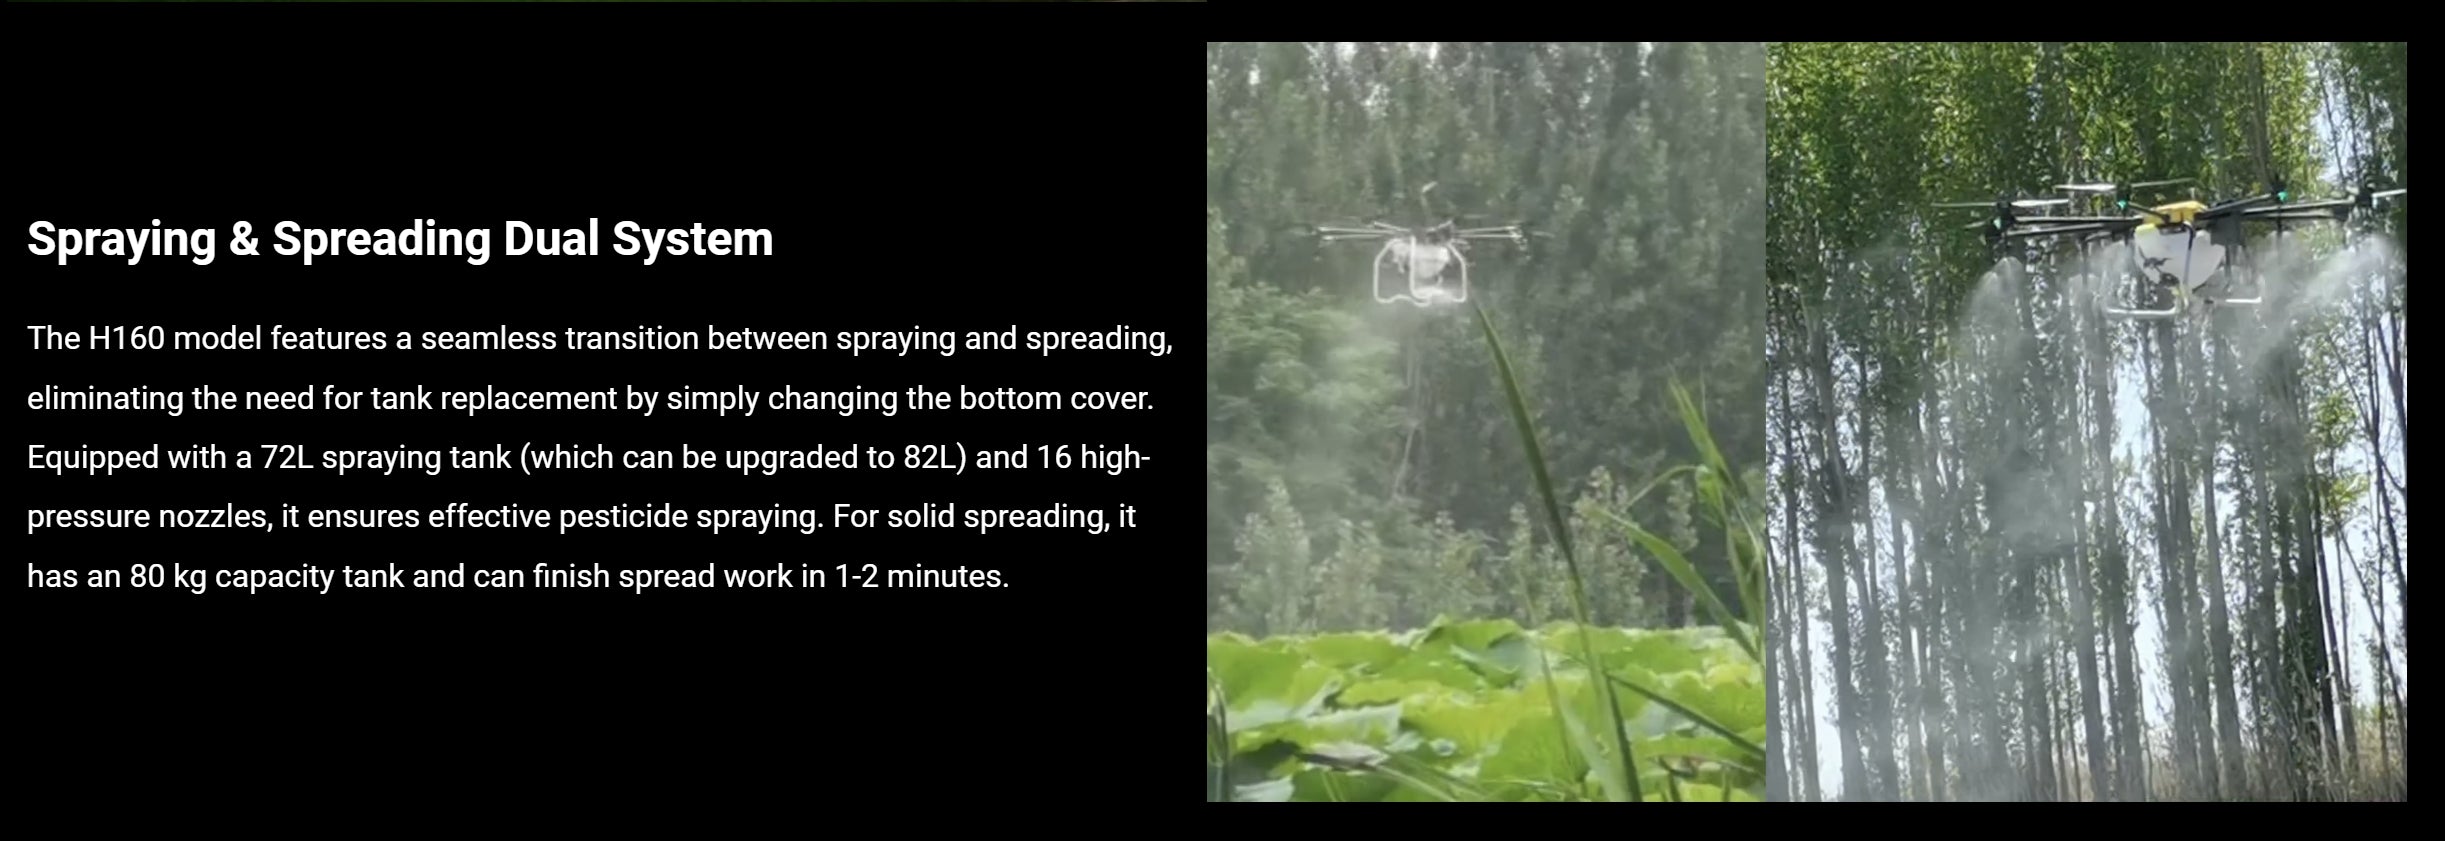 H160 Agricultural Drone, the H160 model features a seamless transition between spraying and spreading . it has 